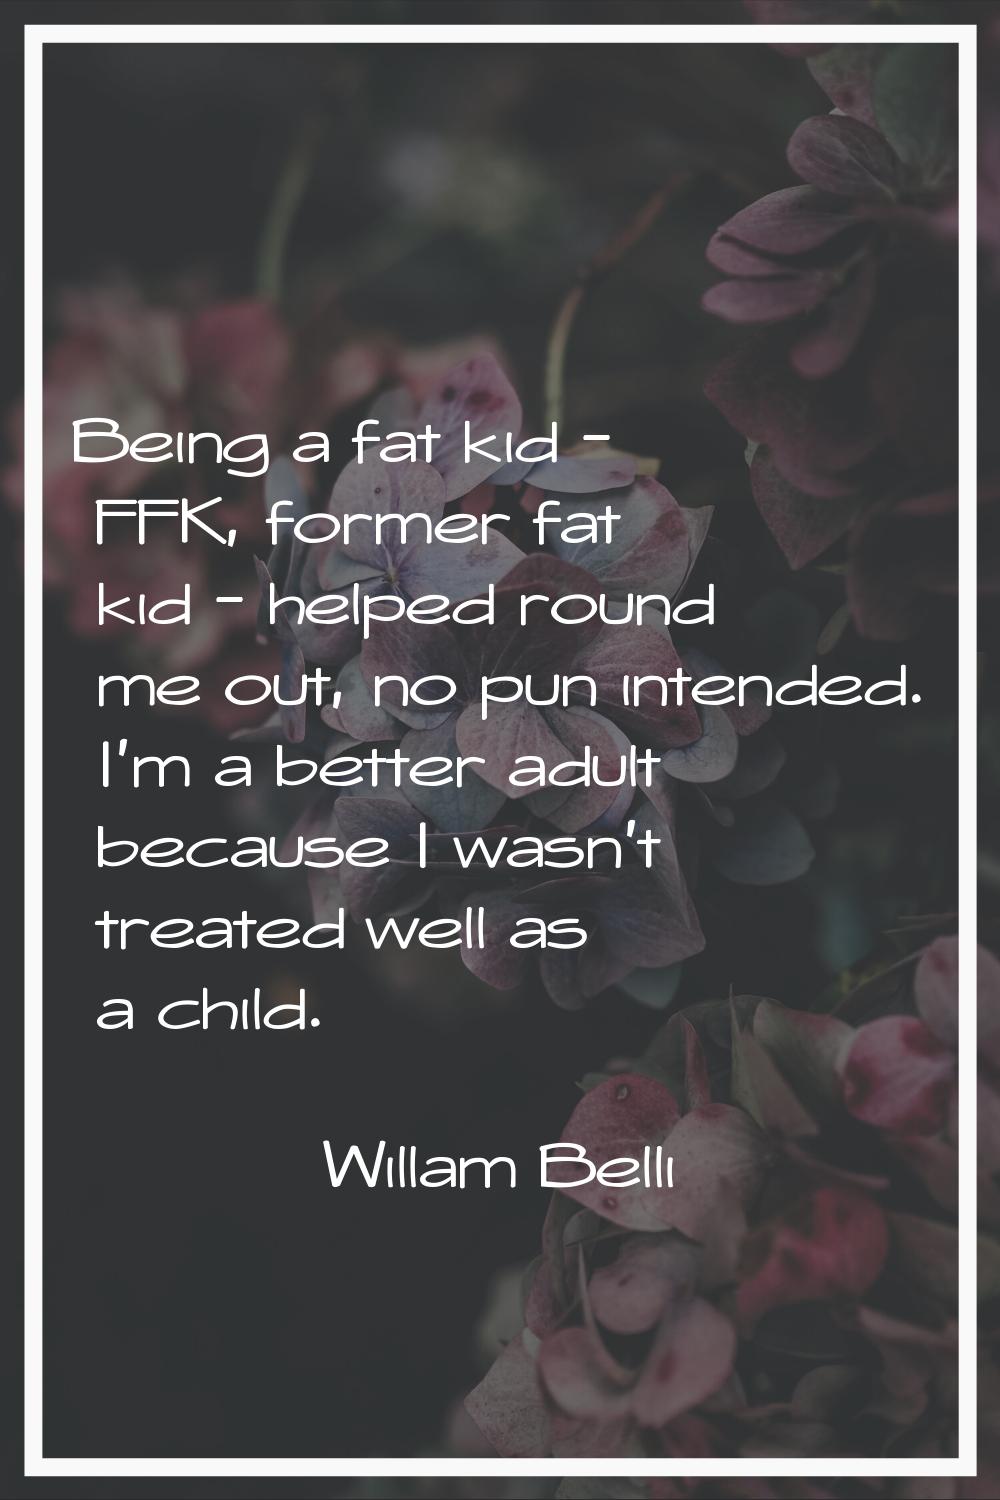 Being a fat kid - FFK, former fat kid - helped round me out, no pun intended. I'm a better adult be